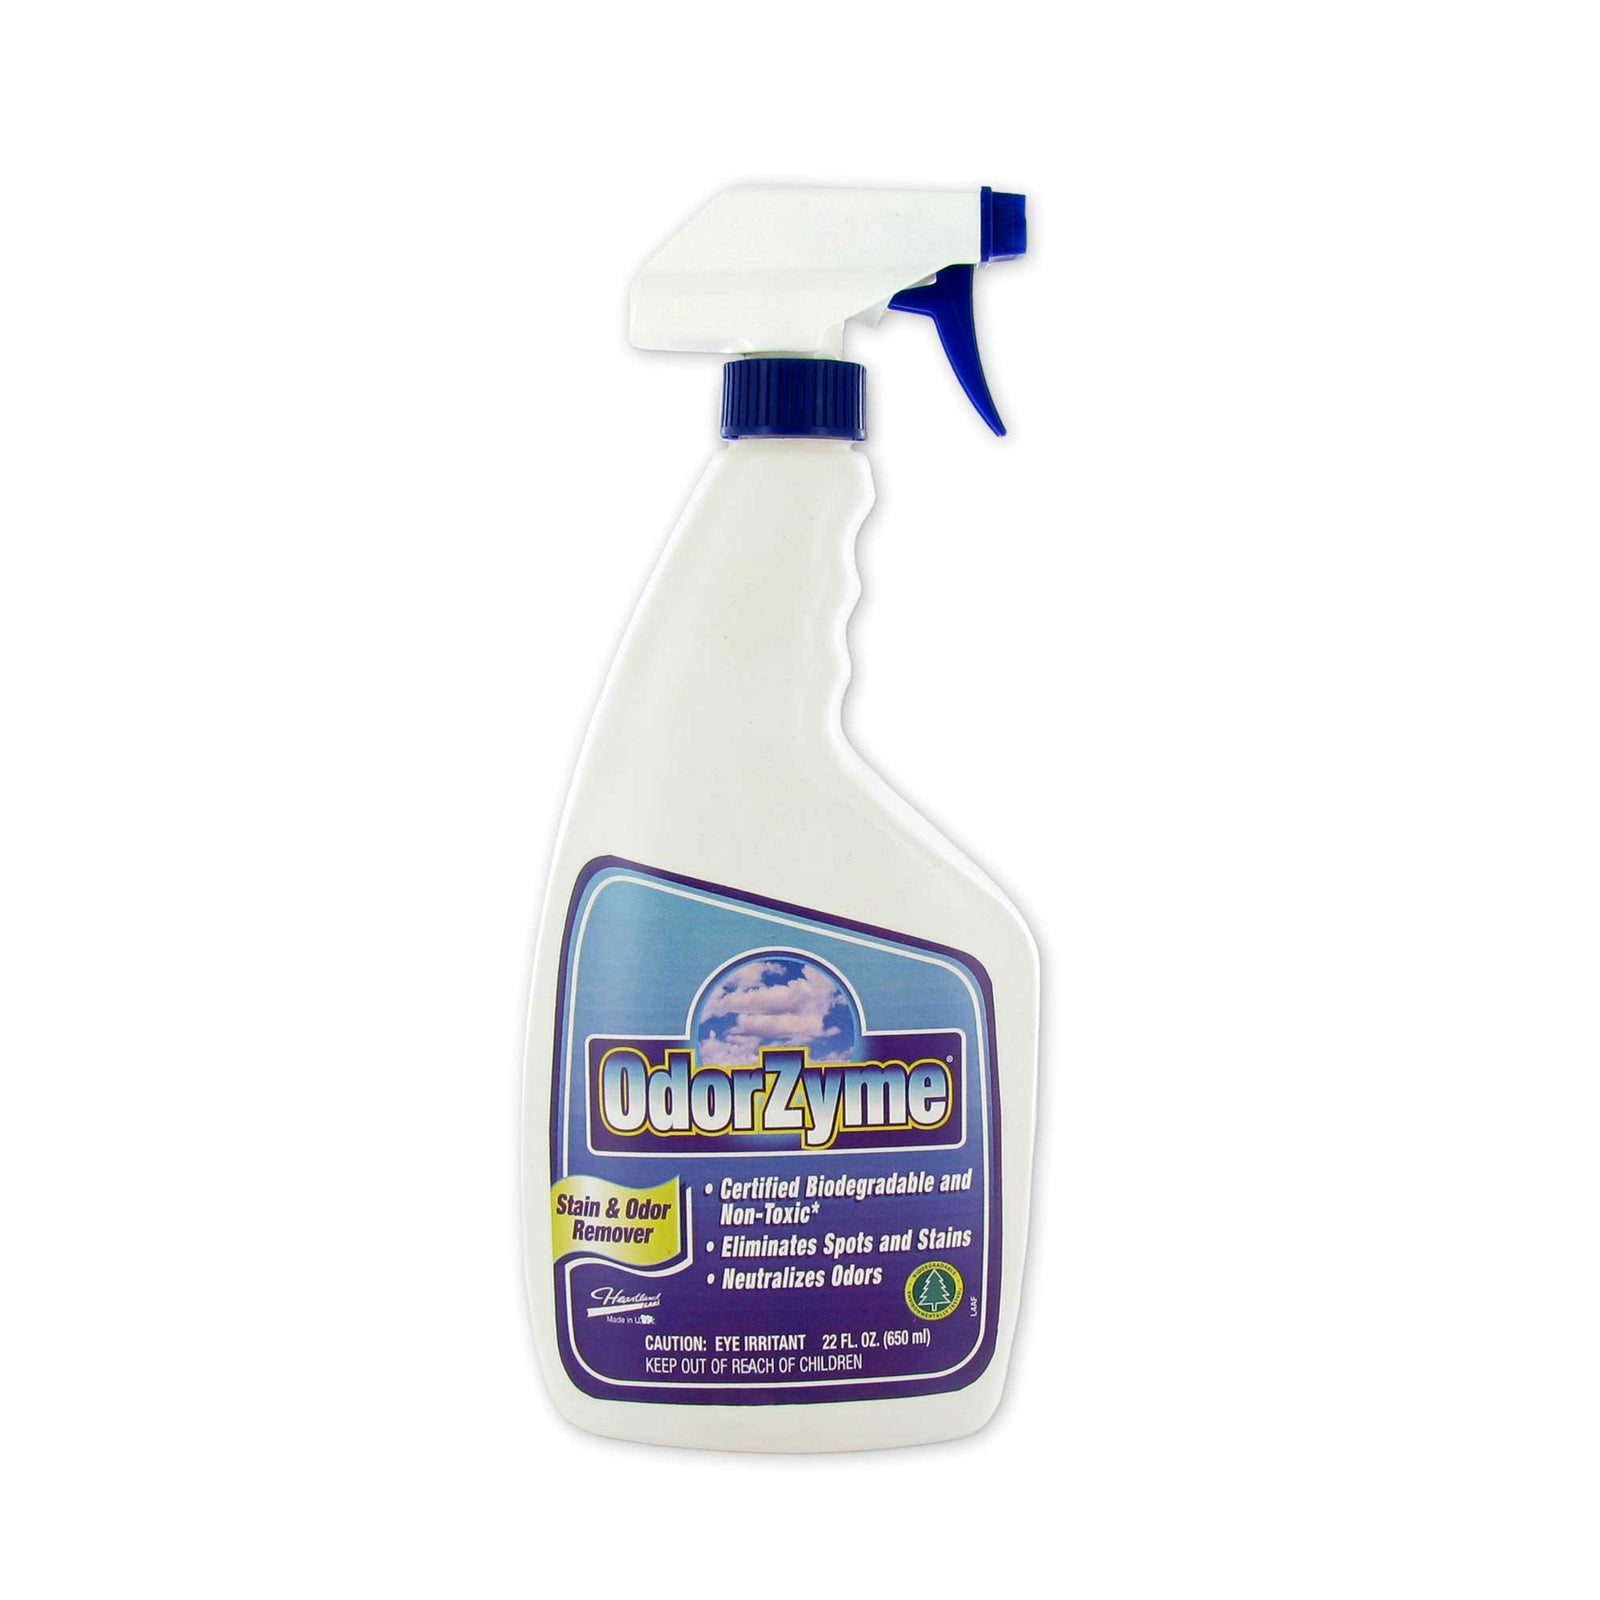 Urine-Erase Stain and Odor Remover: Bedwetting Store - Protective Bedding